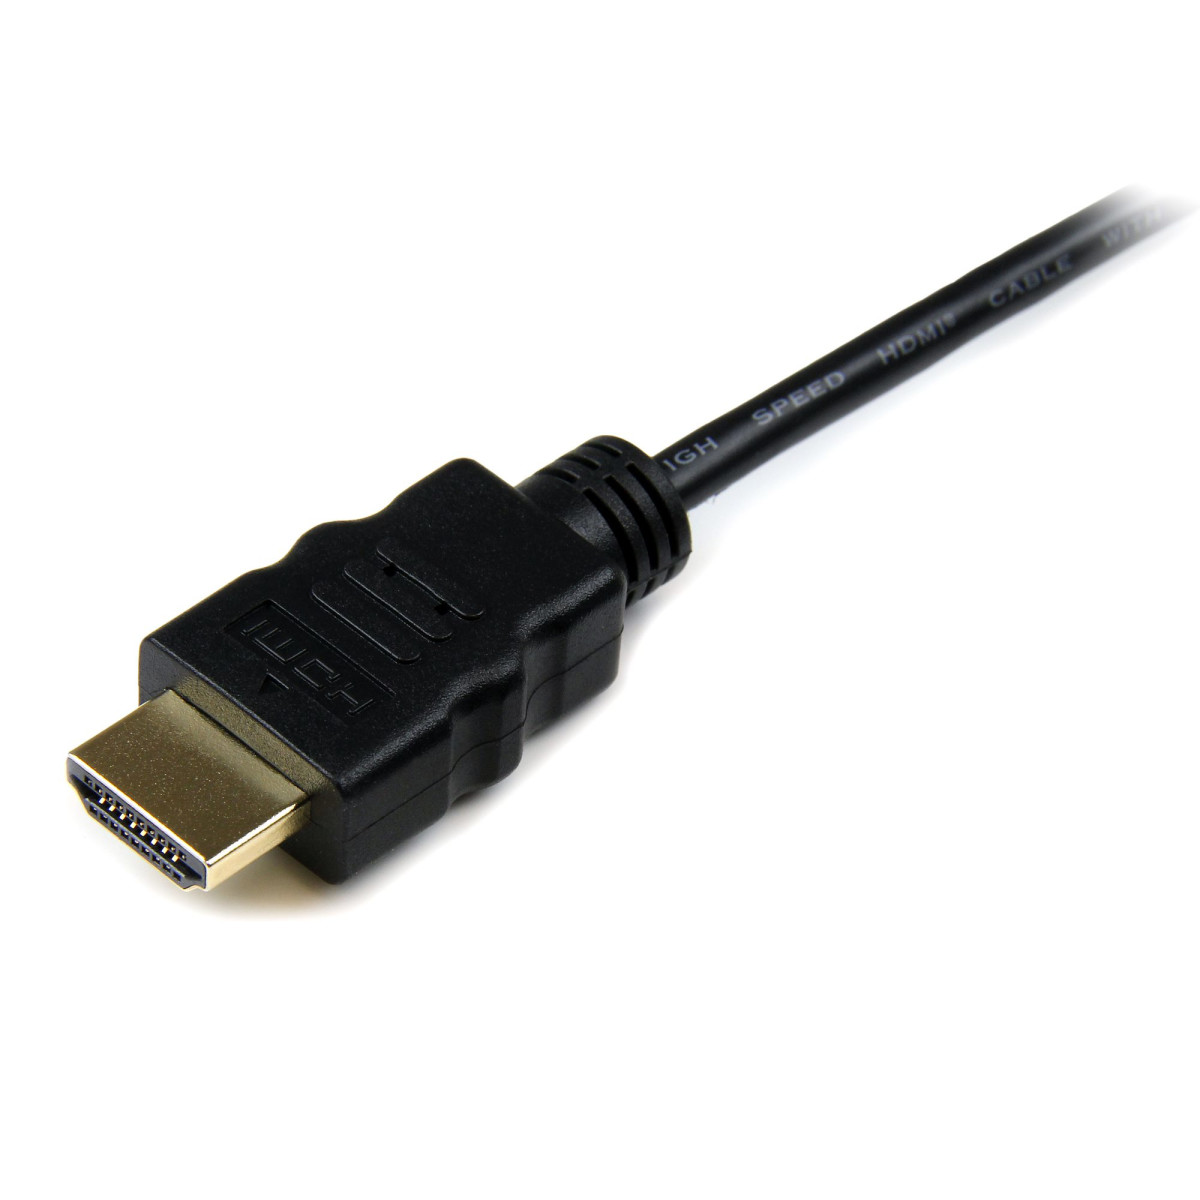 1m High Speed HDMI Cable with Ethernet